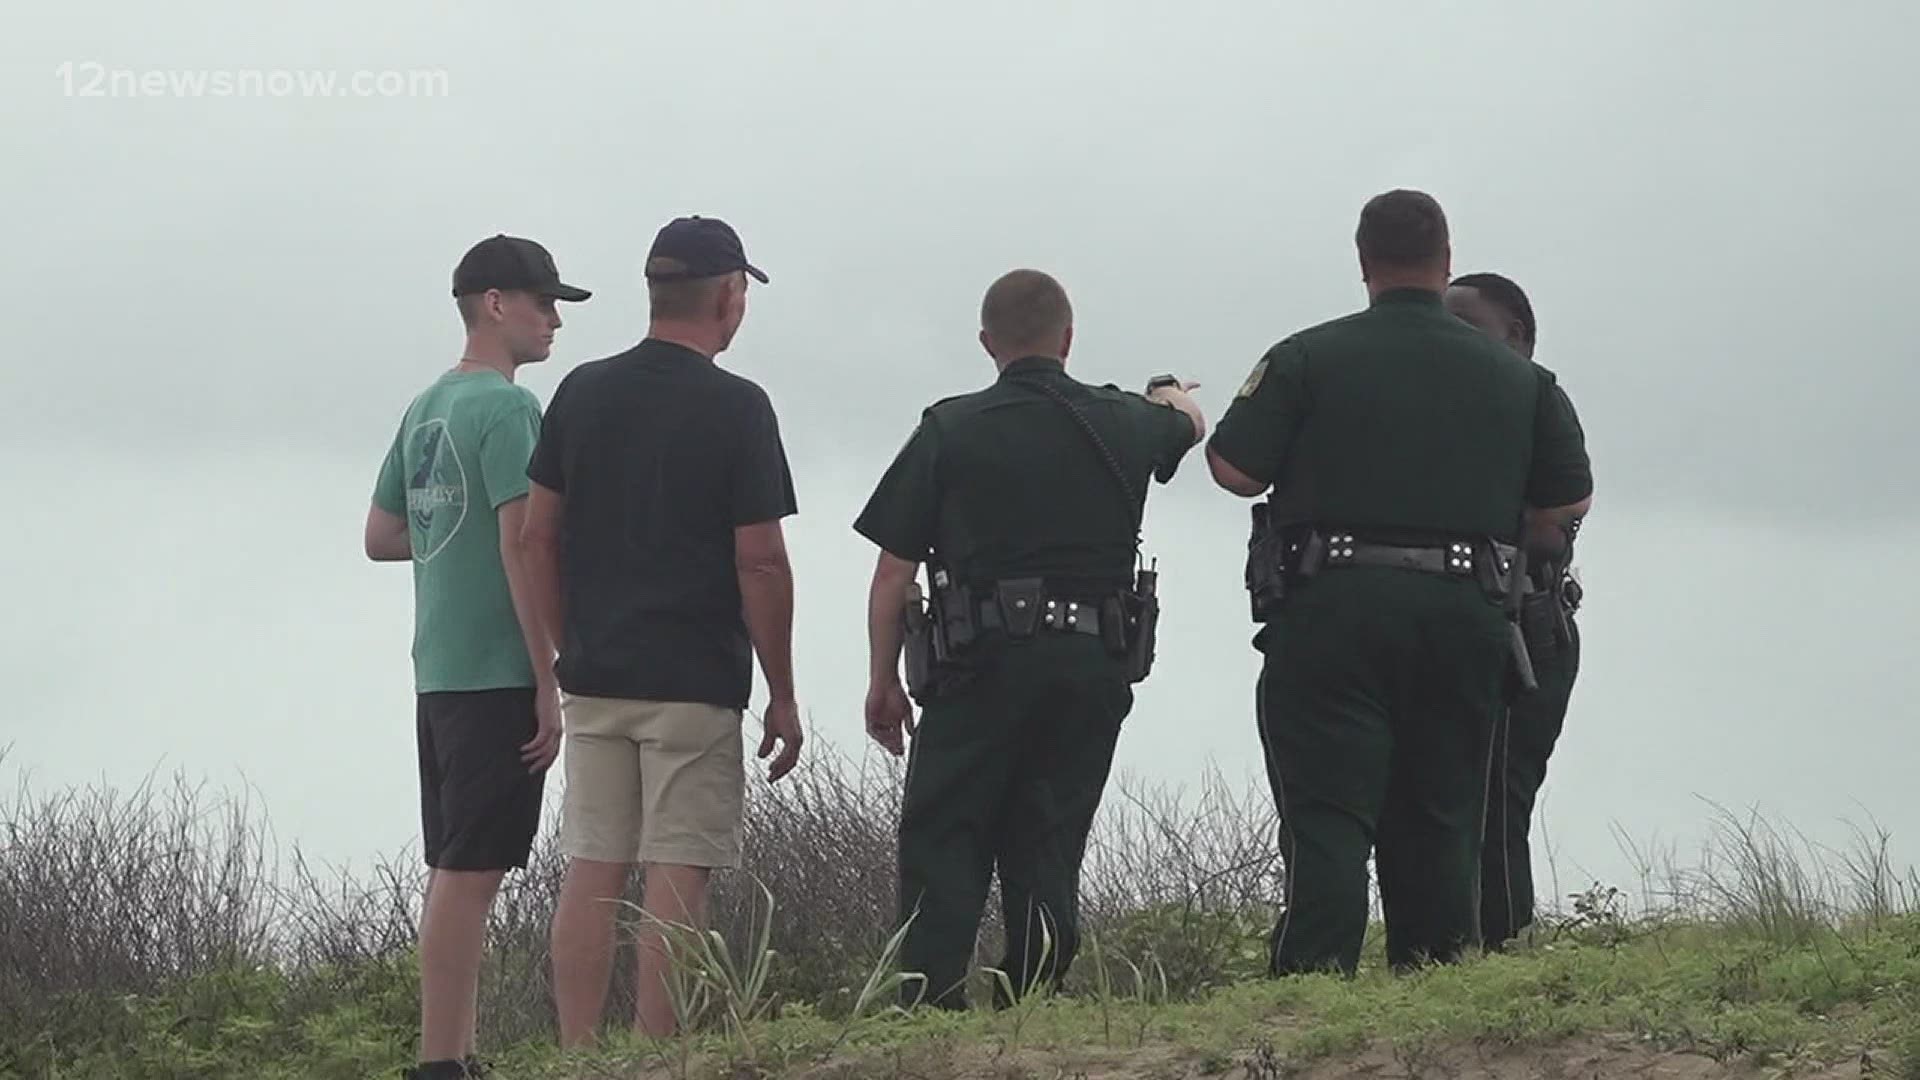 Galveston County Sheriff Office tells 12news more than 220 arrests were made from Thursday till Sunday in connection to the event.